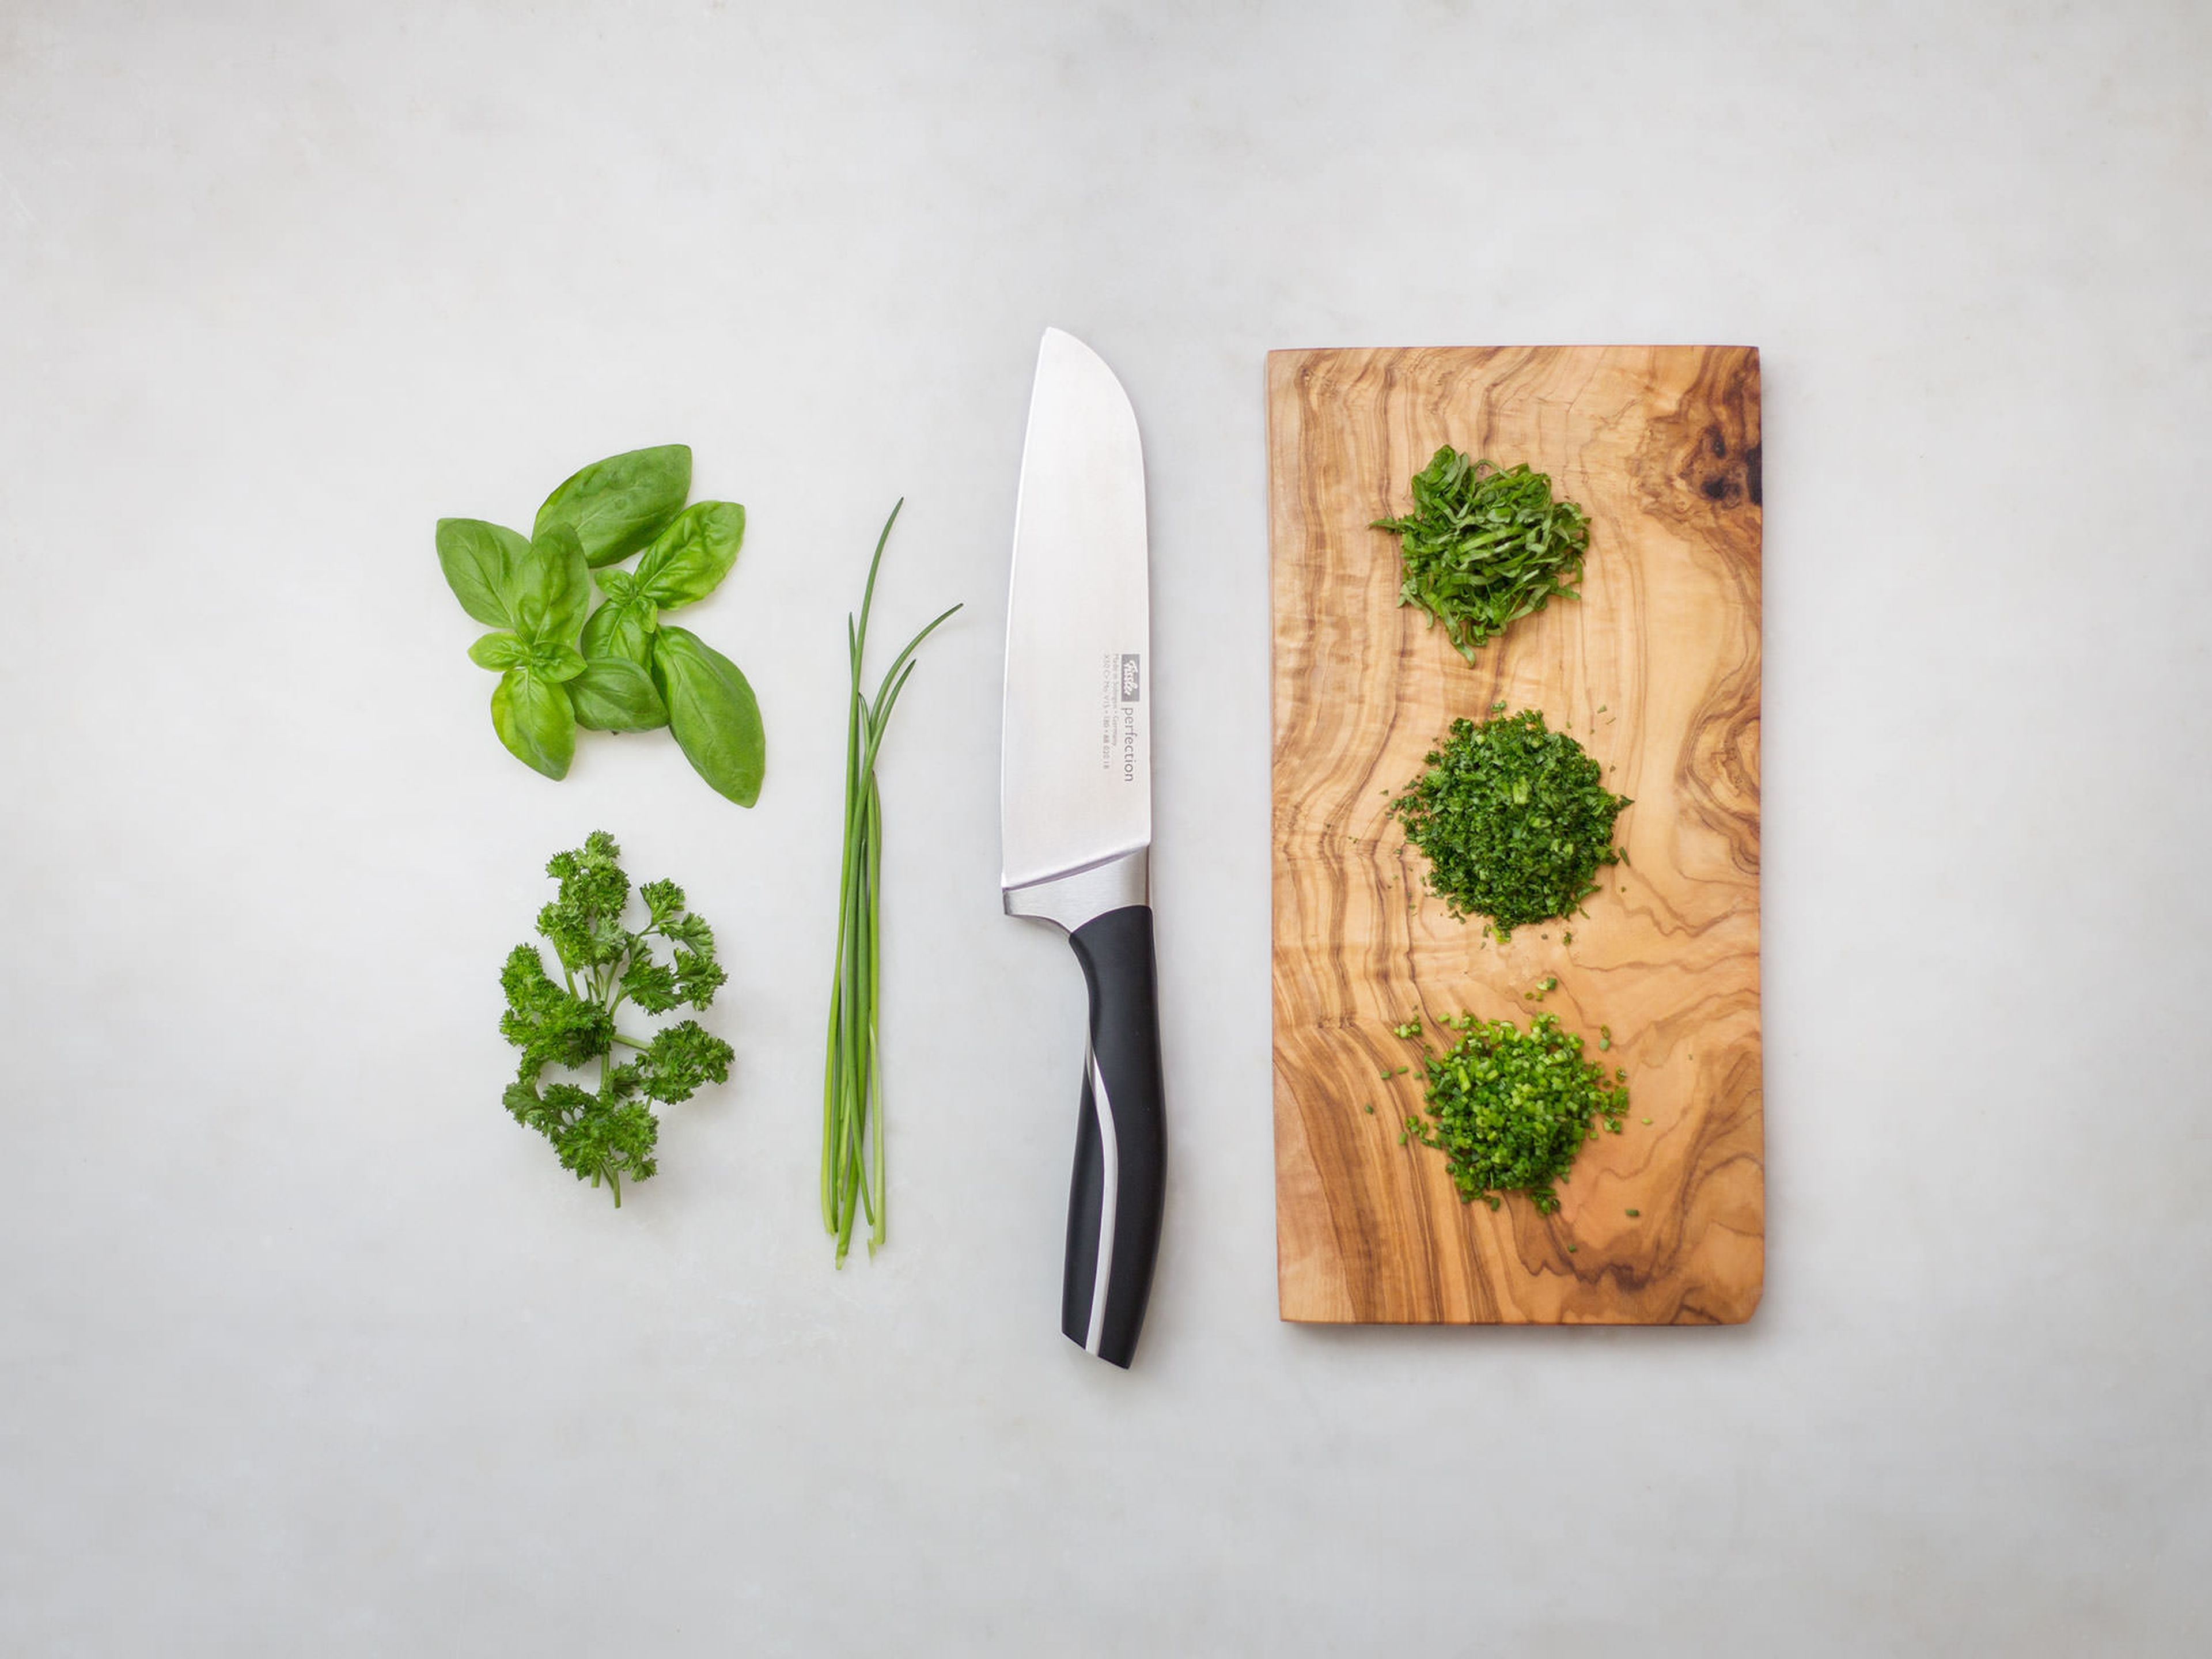 How to chop green herbs